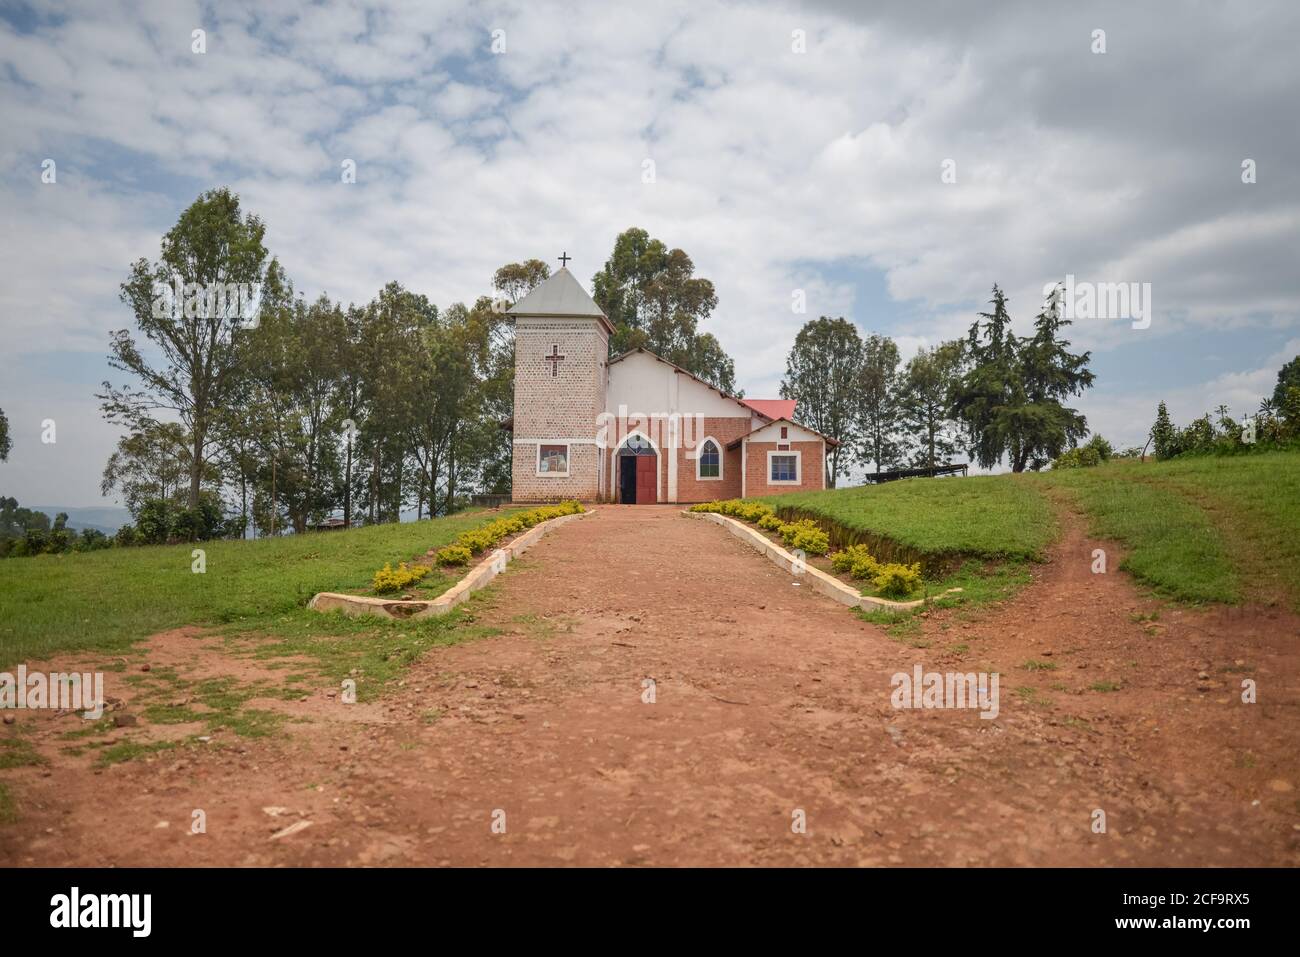 Uganda - November 26, 2016: Empty dirt footpath crossing cozy yard and leading to small white and brown brick chapel located on grassy hillside against tall green trees under blue sky with lush clouds Stock Photo